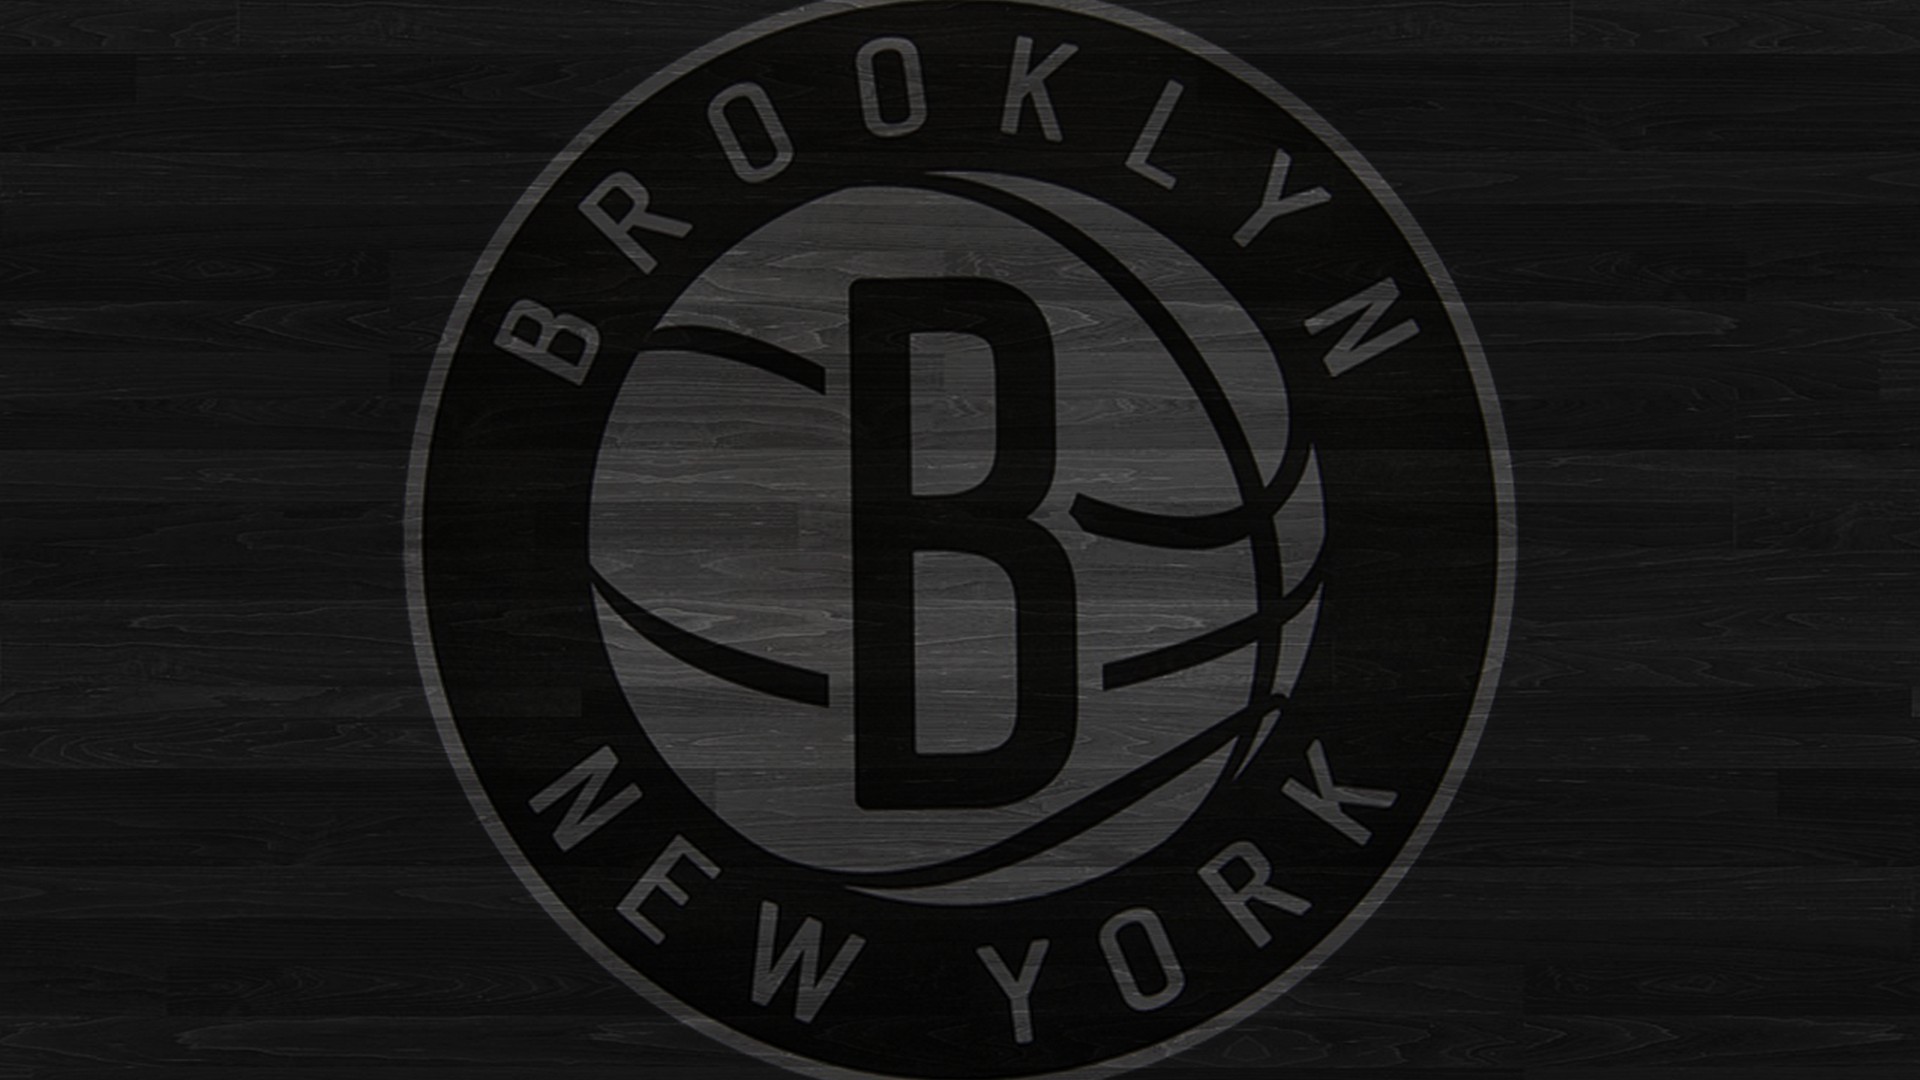 Brooklyn Nets Desktop Wallpapers with image dimensions 1920x1080 pixel. You can make this wallpaper for your Desktop Computer Backgrounds, Windows or Mac Screensavers, iPhone Lock screen, Tablet or Android and another Mobile Phone device